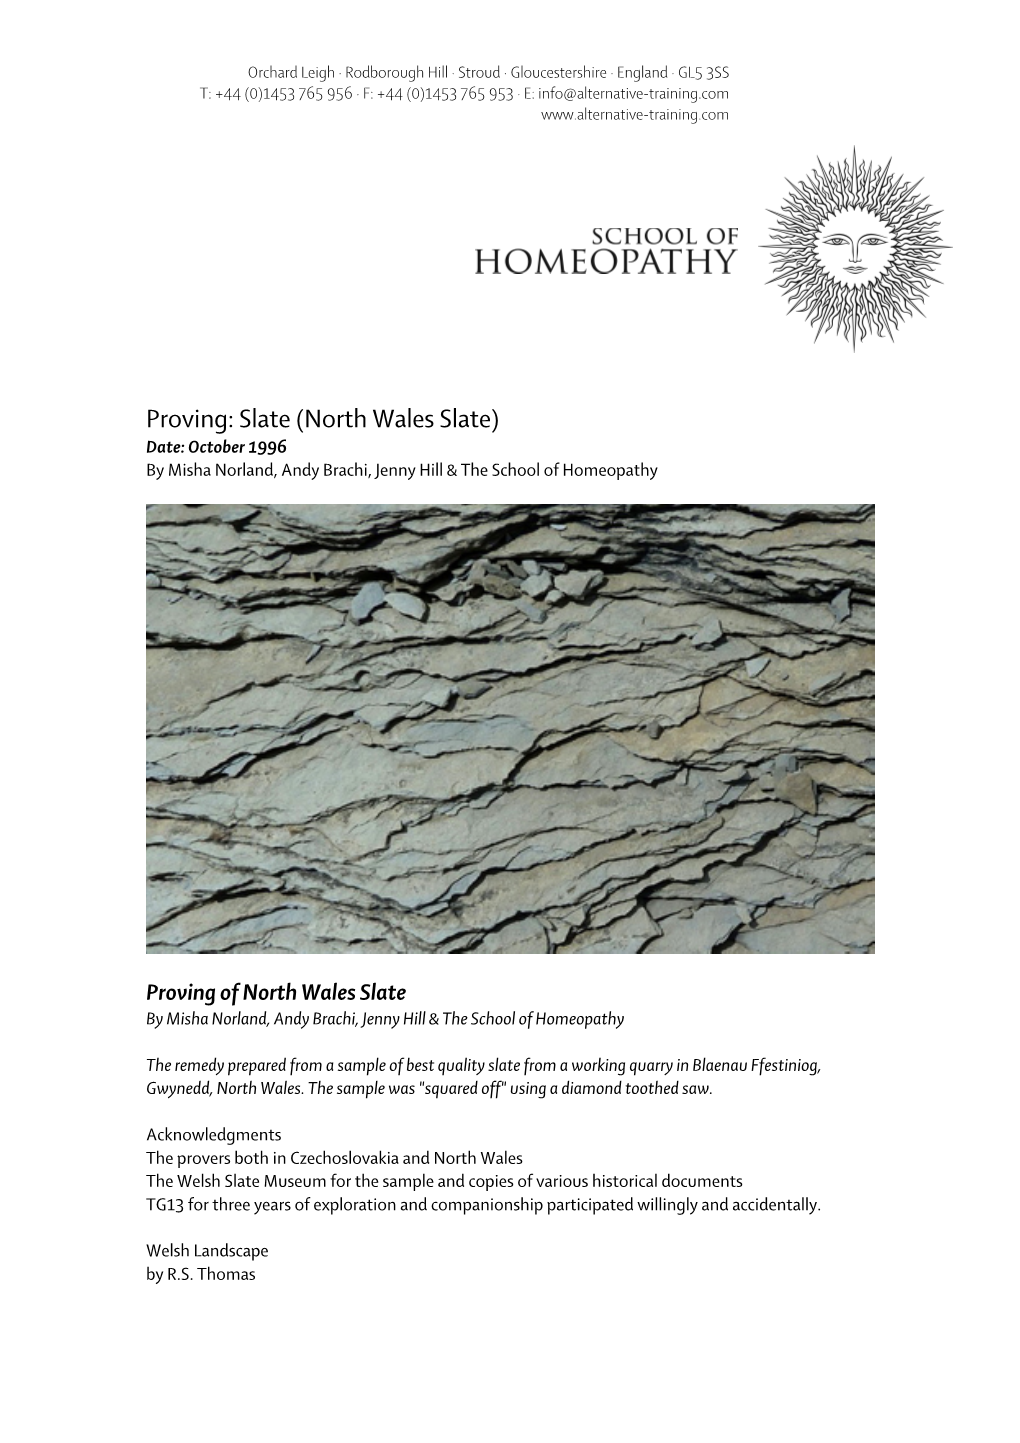 Slate (North Wales Slate) Date: October 1996 by Misha Norland, Andy Brachi, Jenny Hill & the School of Homeopathy